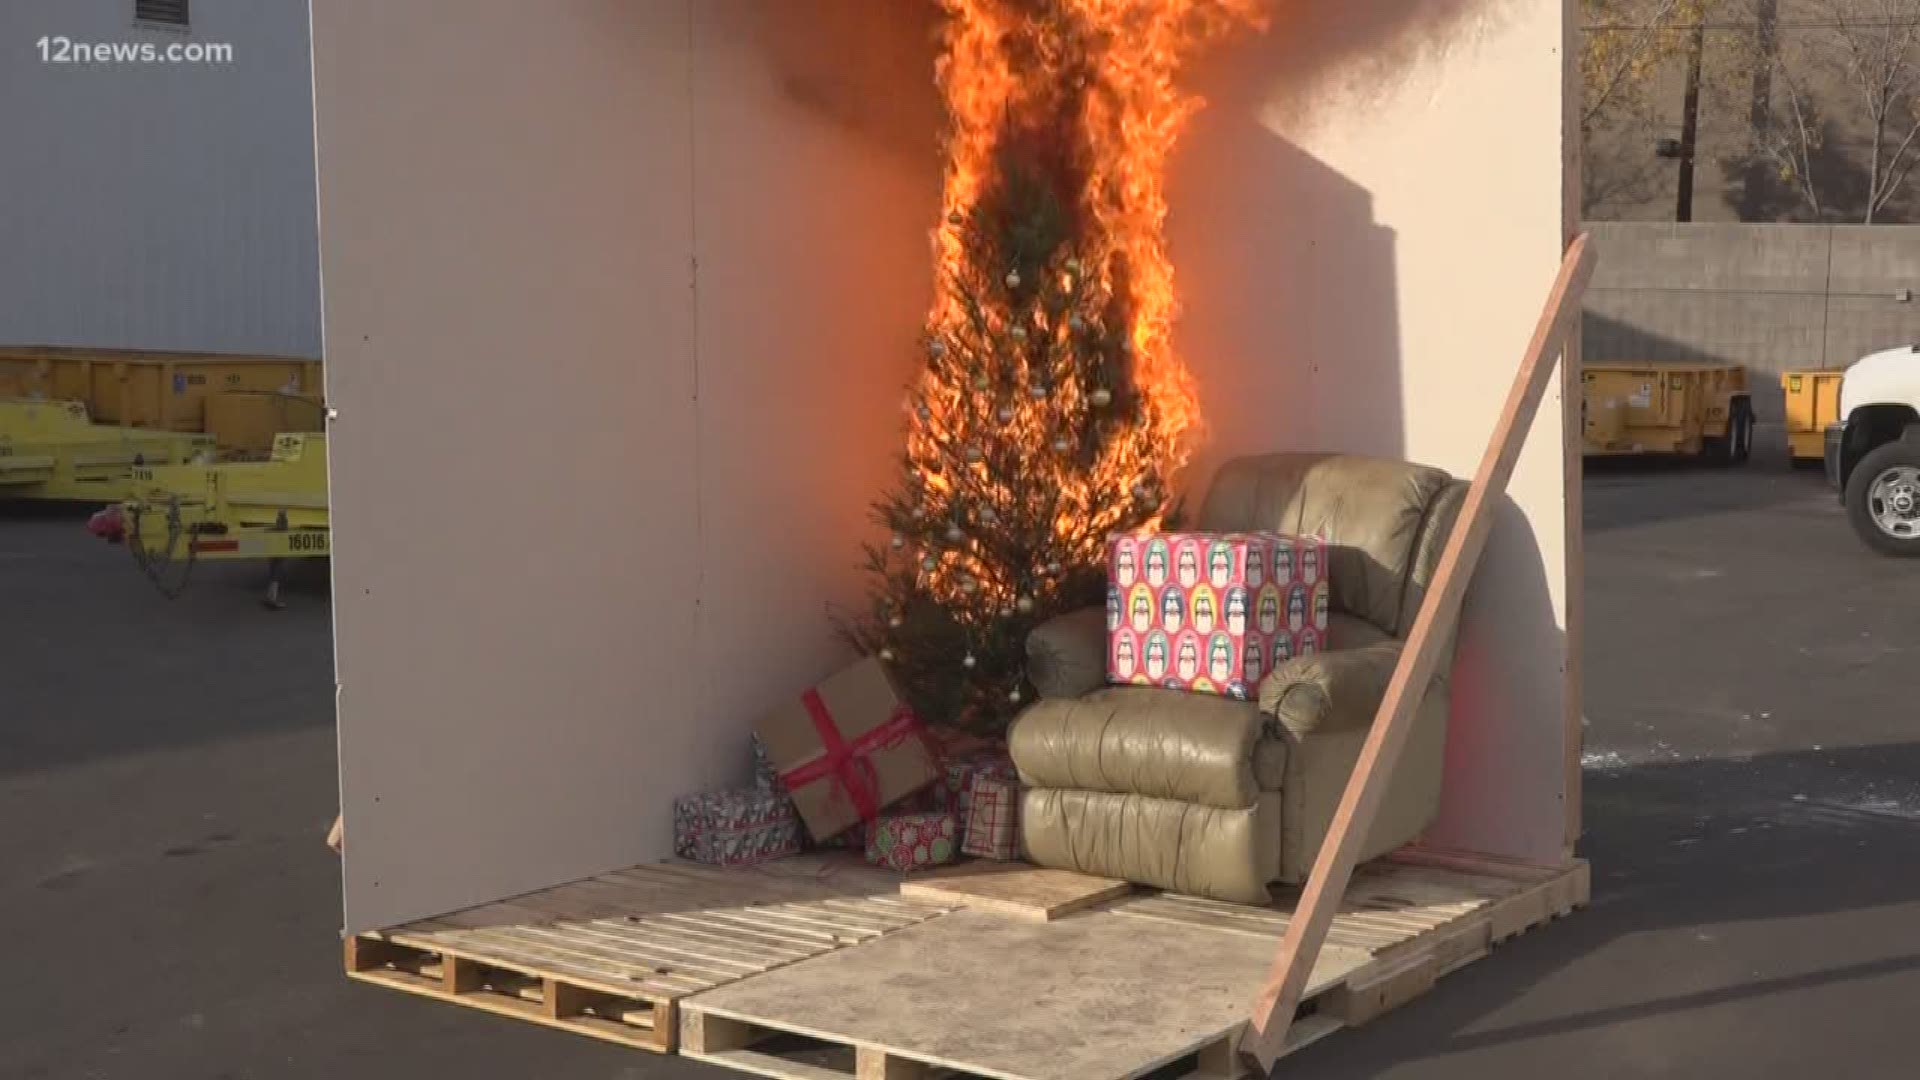 You may want to extend Christmas into the new year, but it may not be safe. We tell you how to prevent your tree from catching fire.